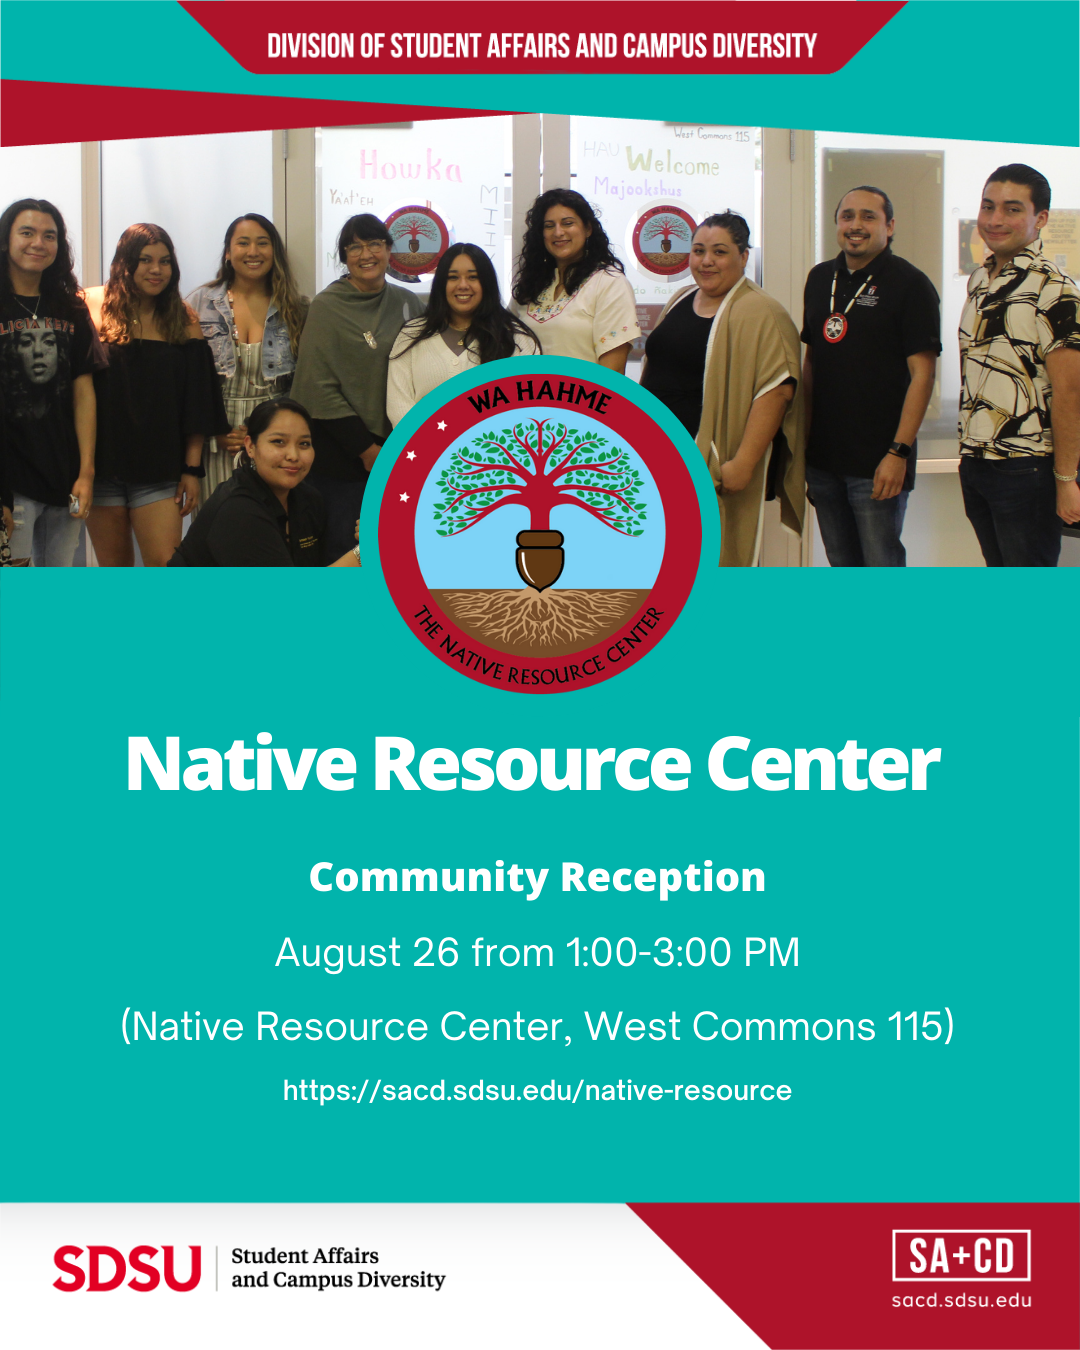 Native Resource Center Open House Aug 26, 1-3p at the NRC West Commons 115